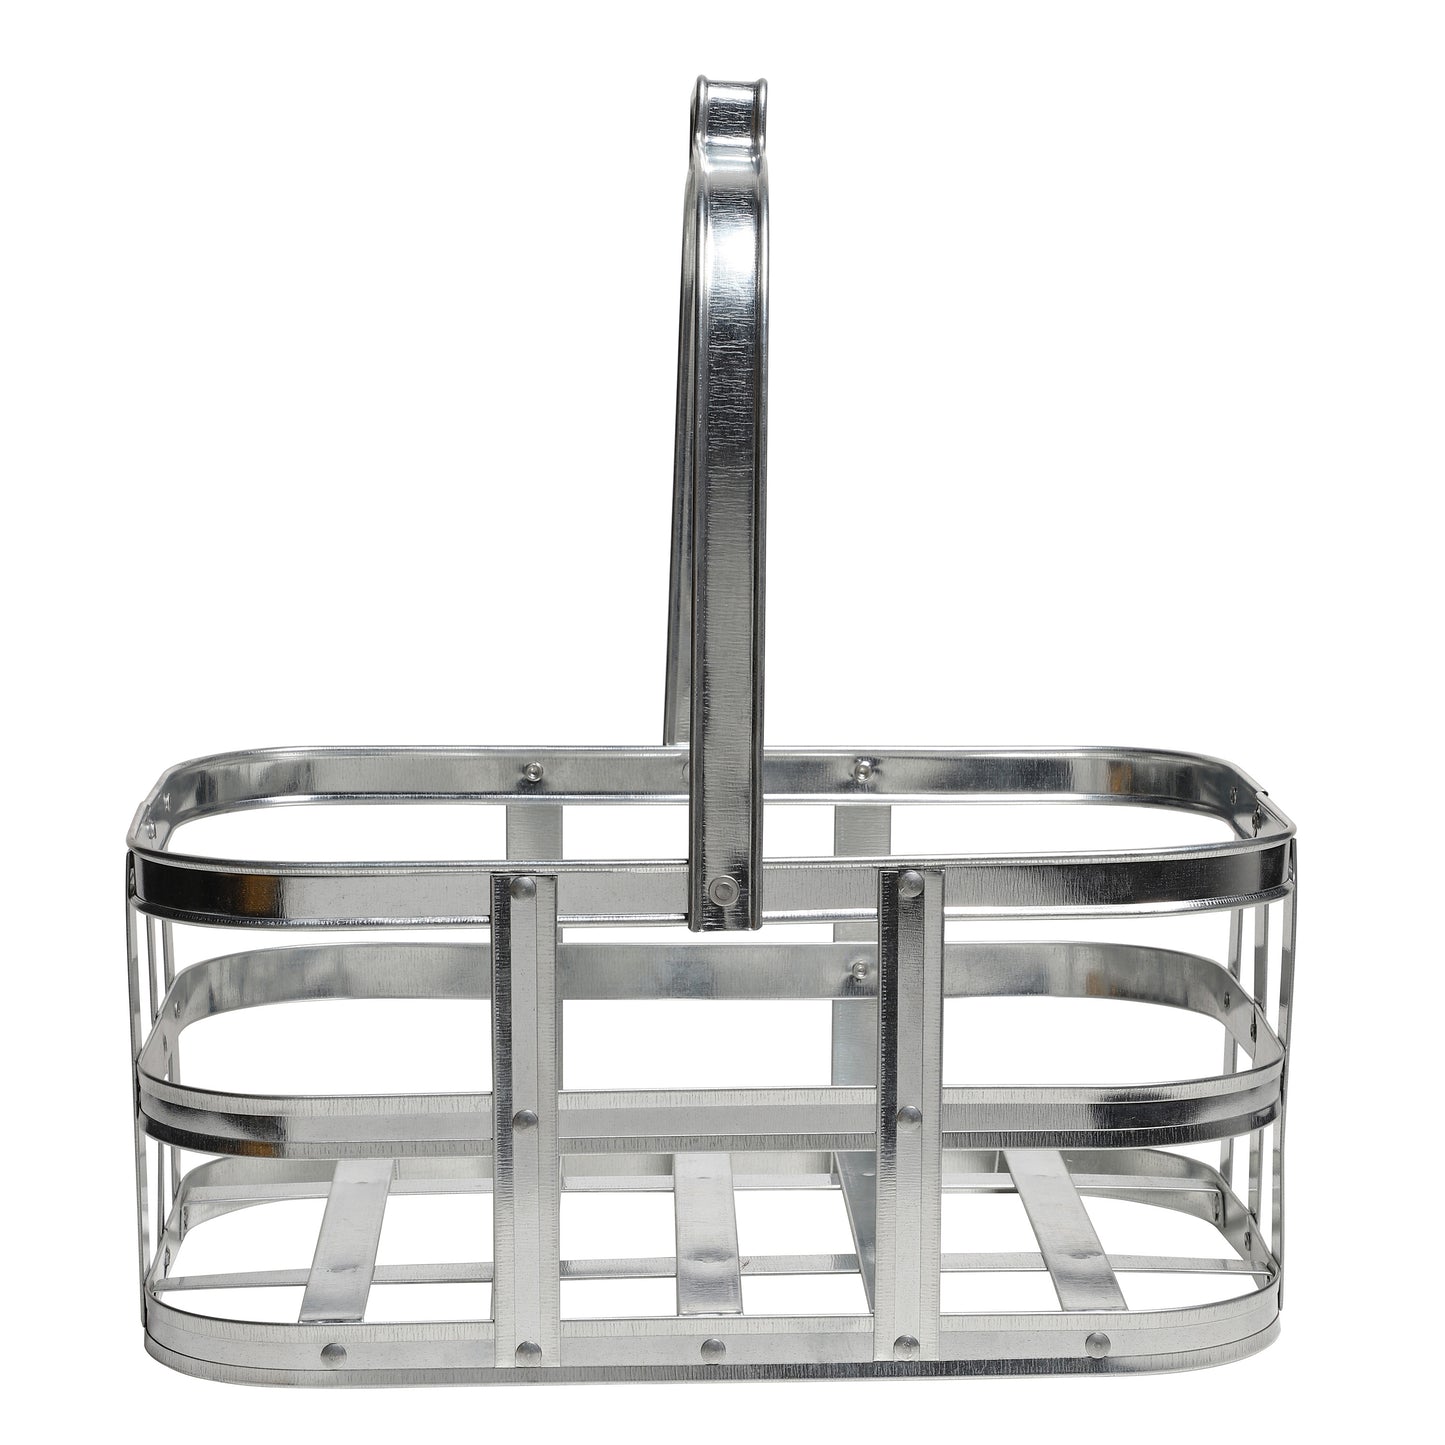 6" Galvanized Metal Basket for Storage with Handle